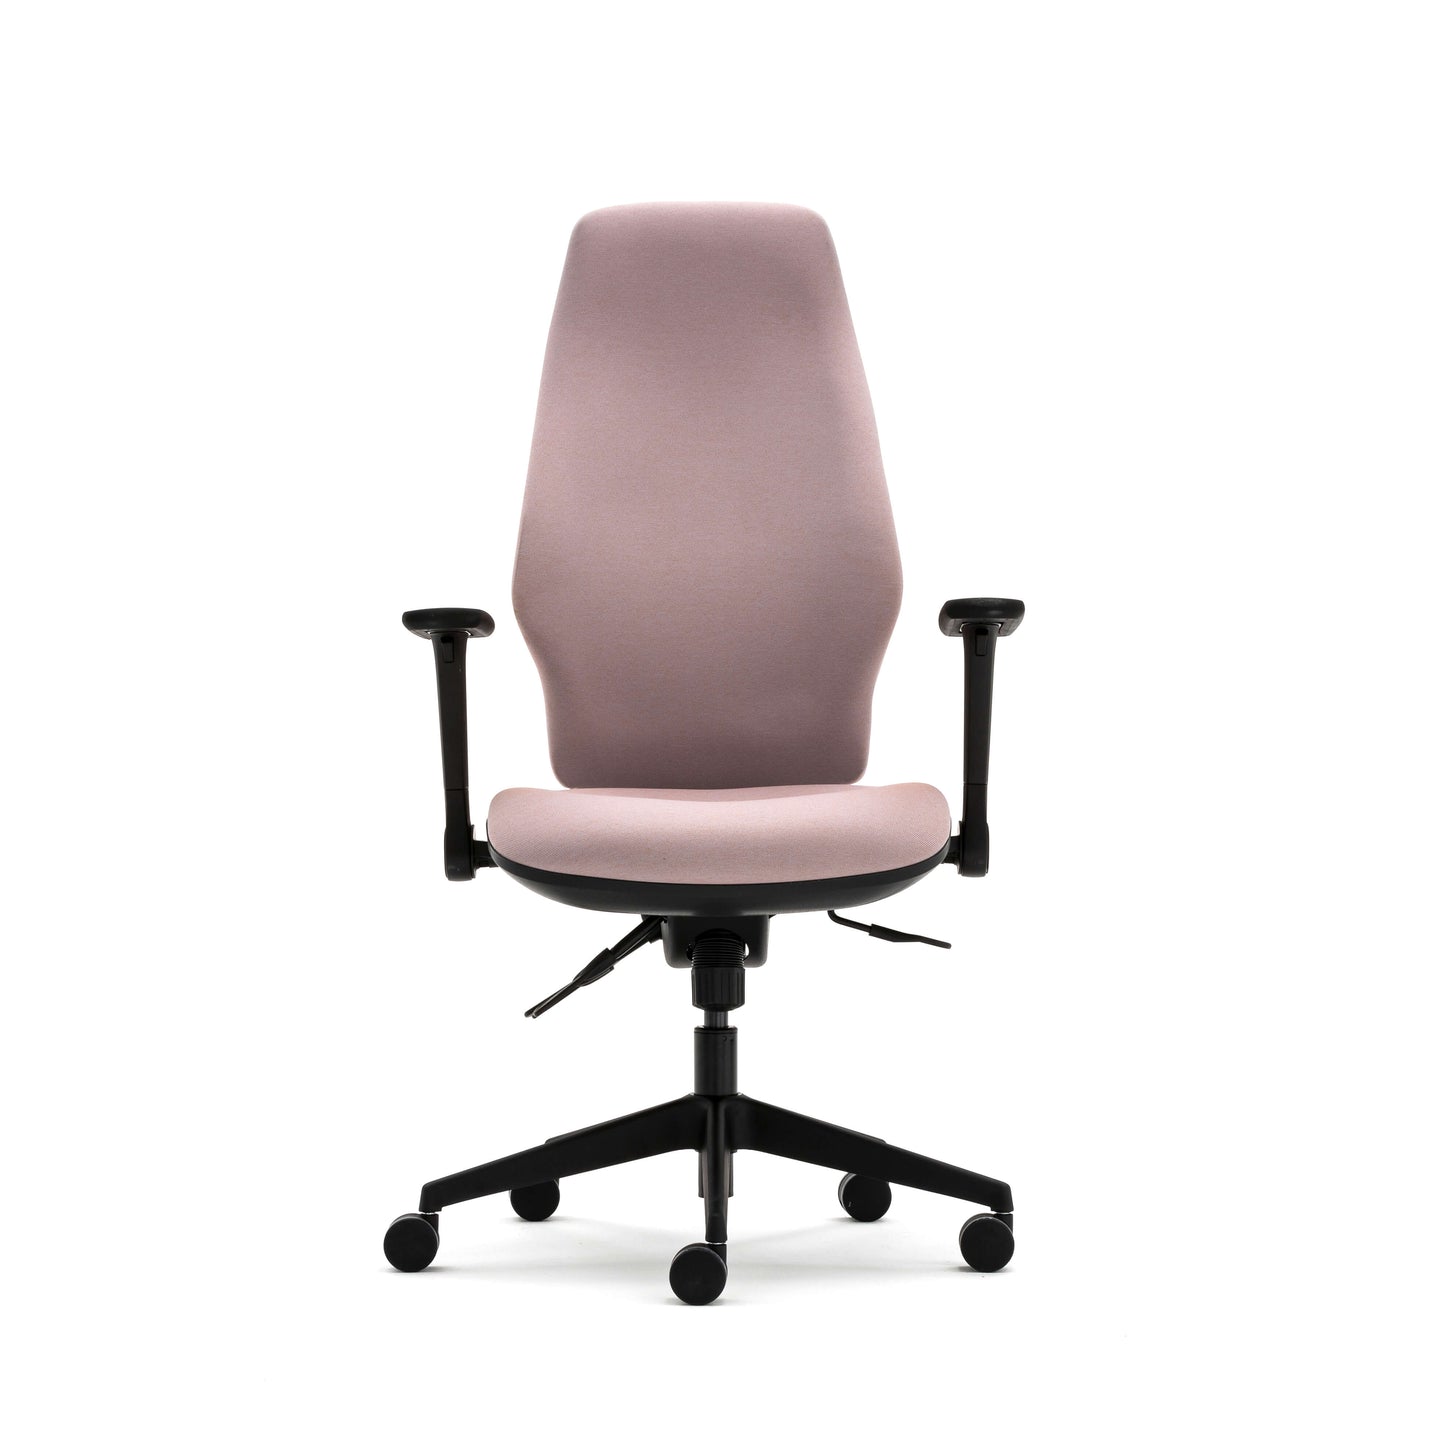 OC307FDA - ORTHOPAEDICA 300 SERIES - Fold Down Height Adjustable Arms - Independent Mechanism